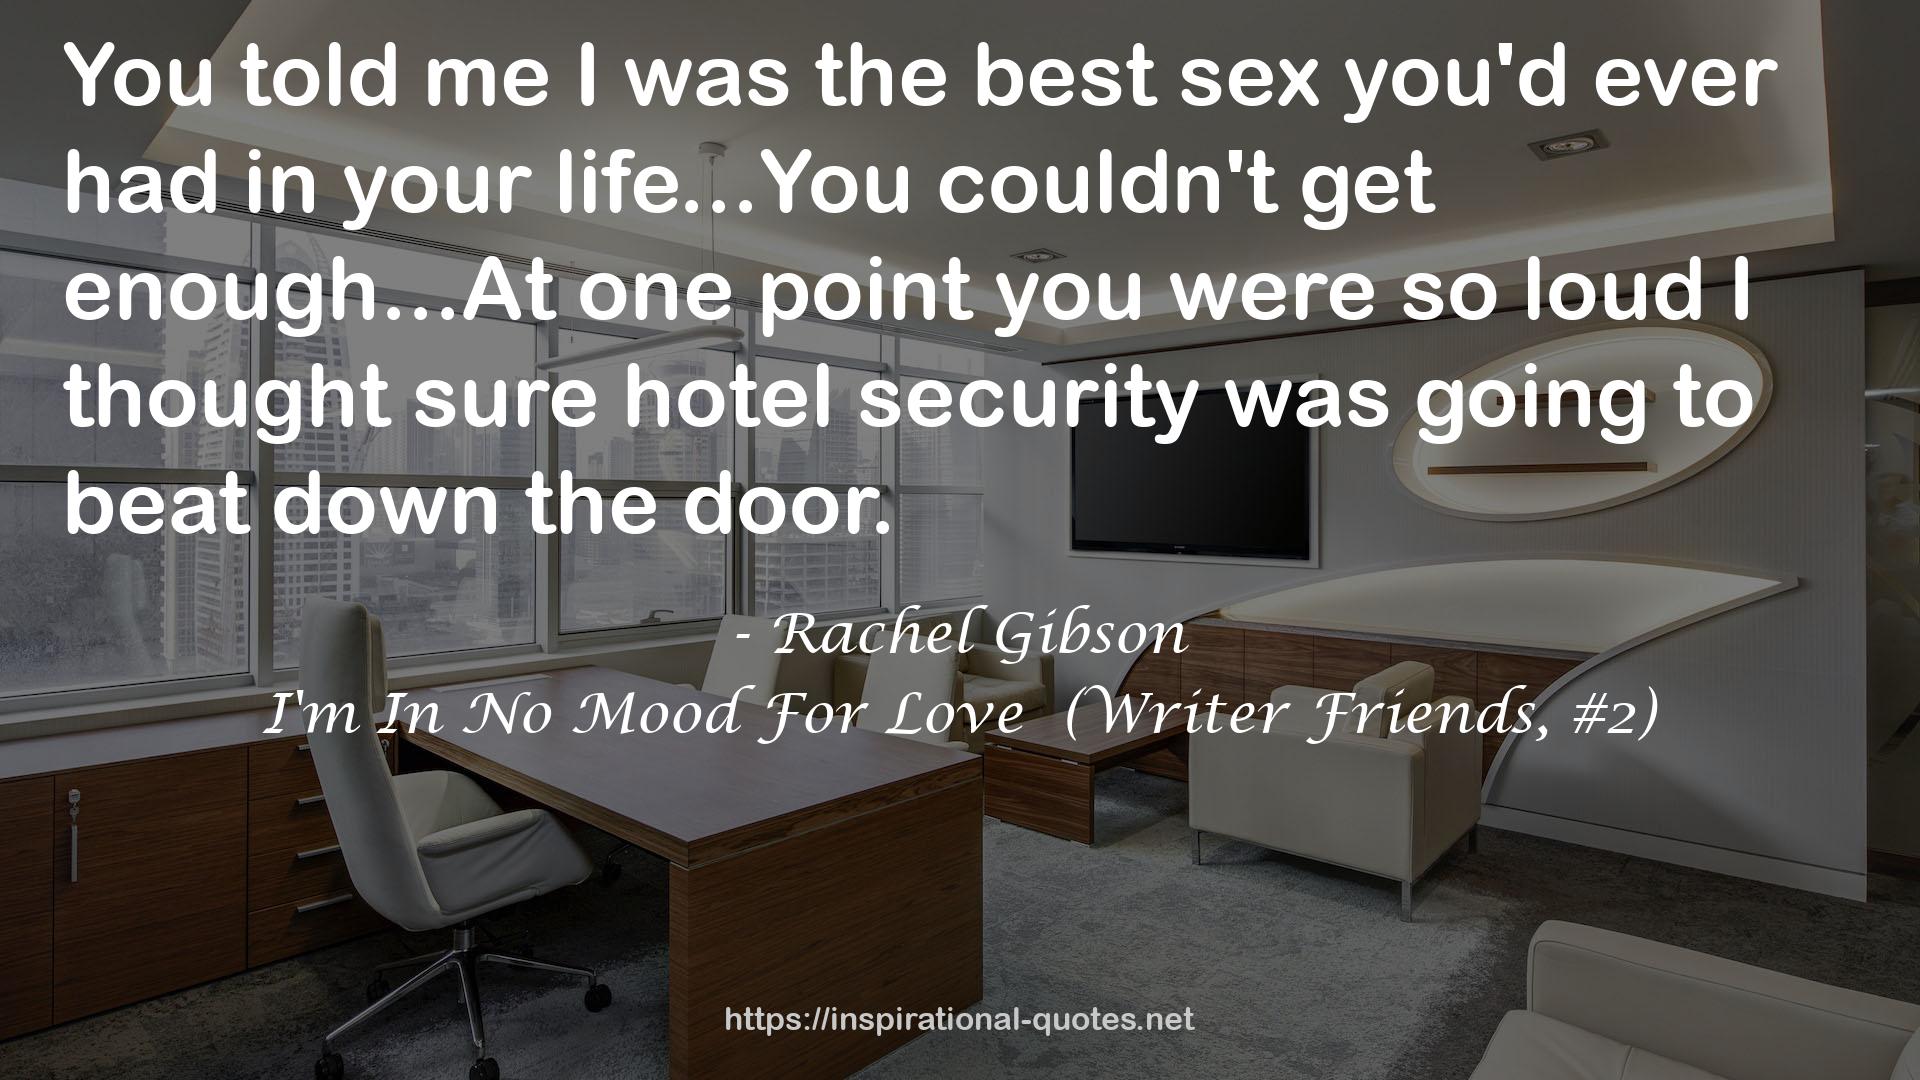 I'm In No Mood For Love  (Writer Friends, #2) QUOTES